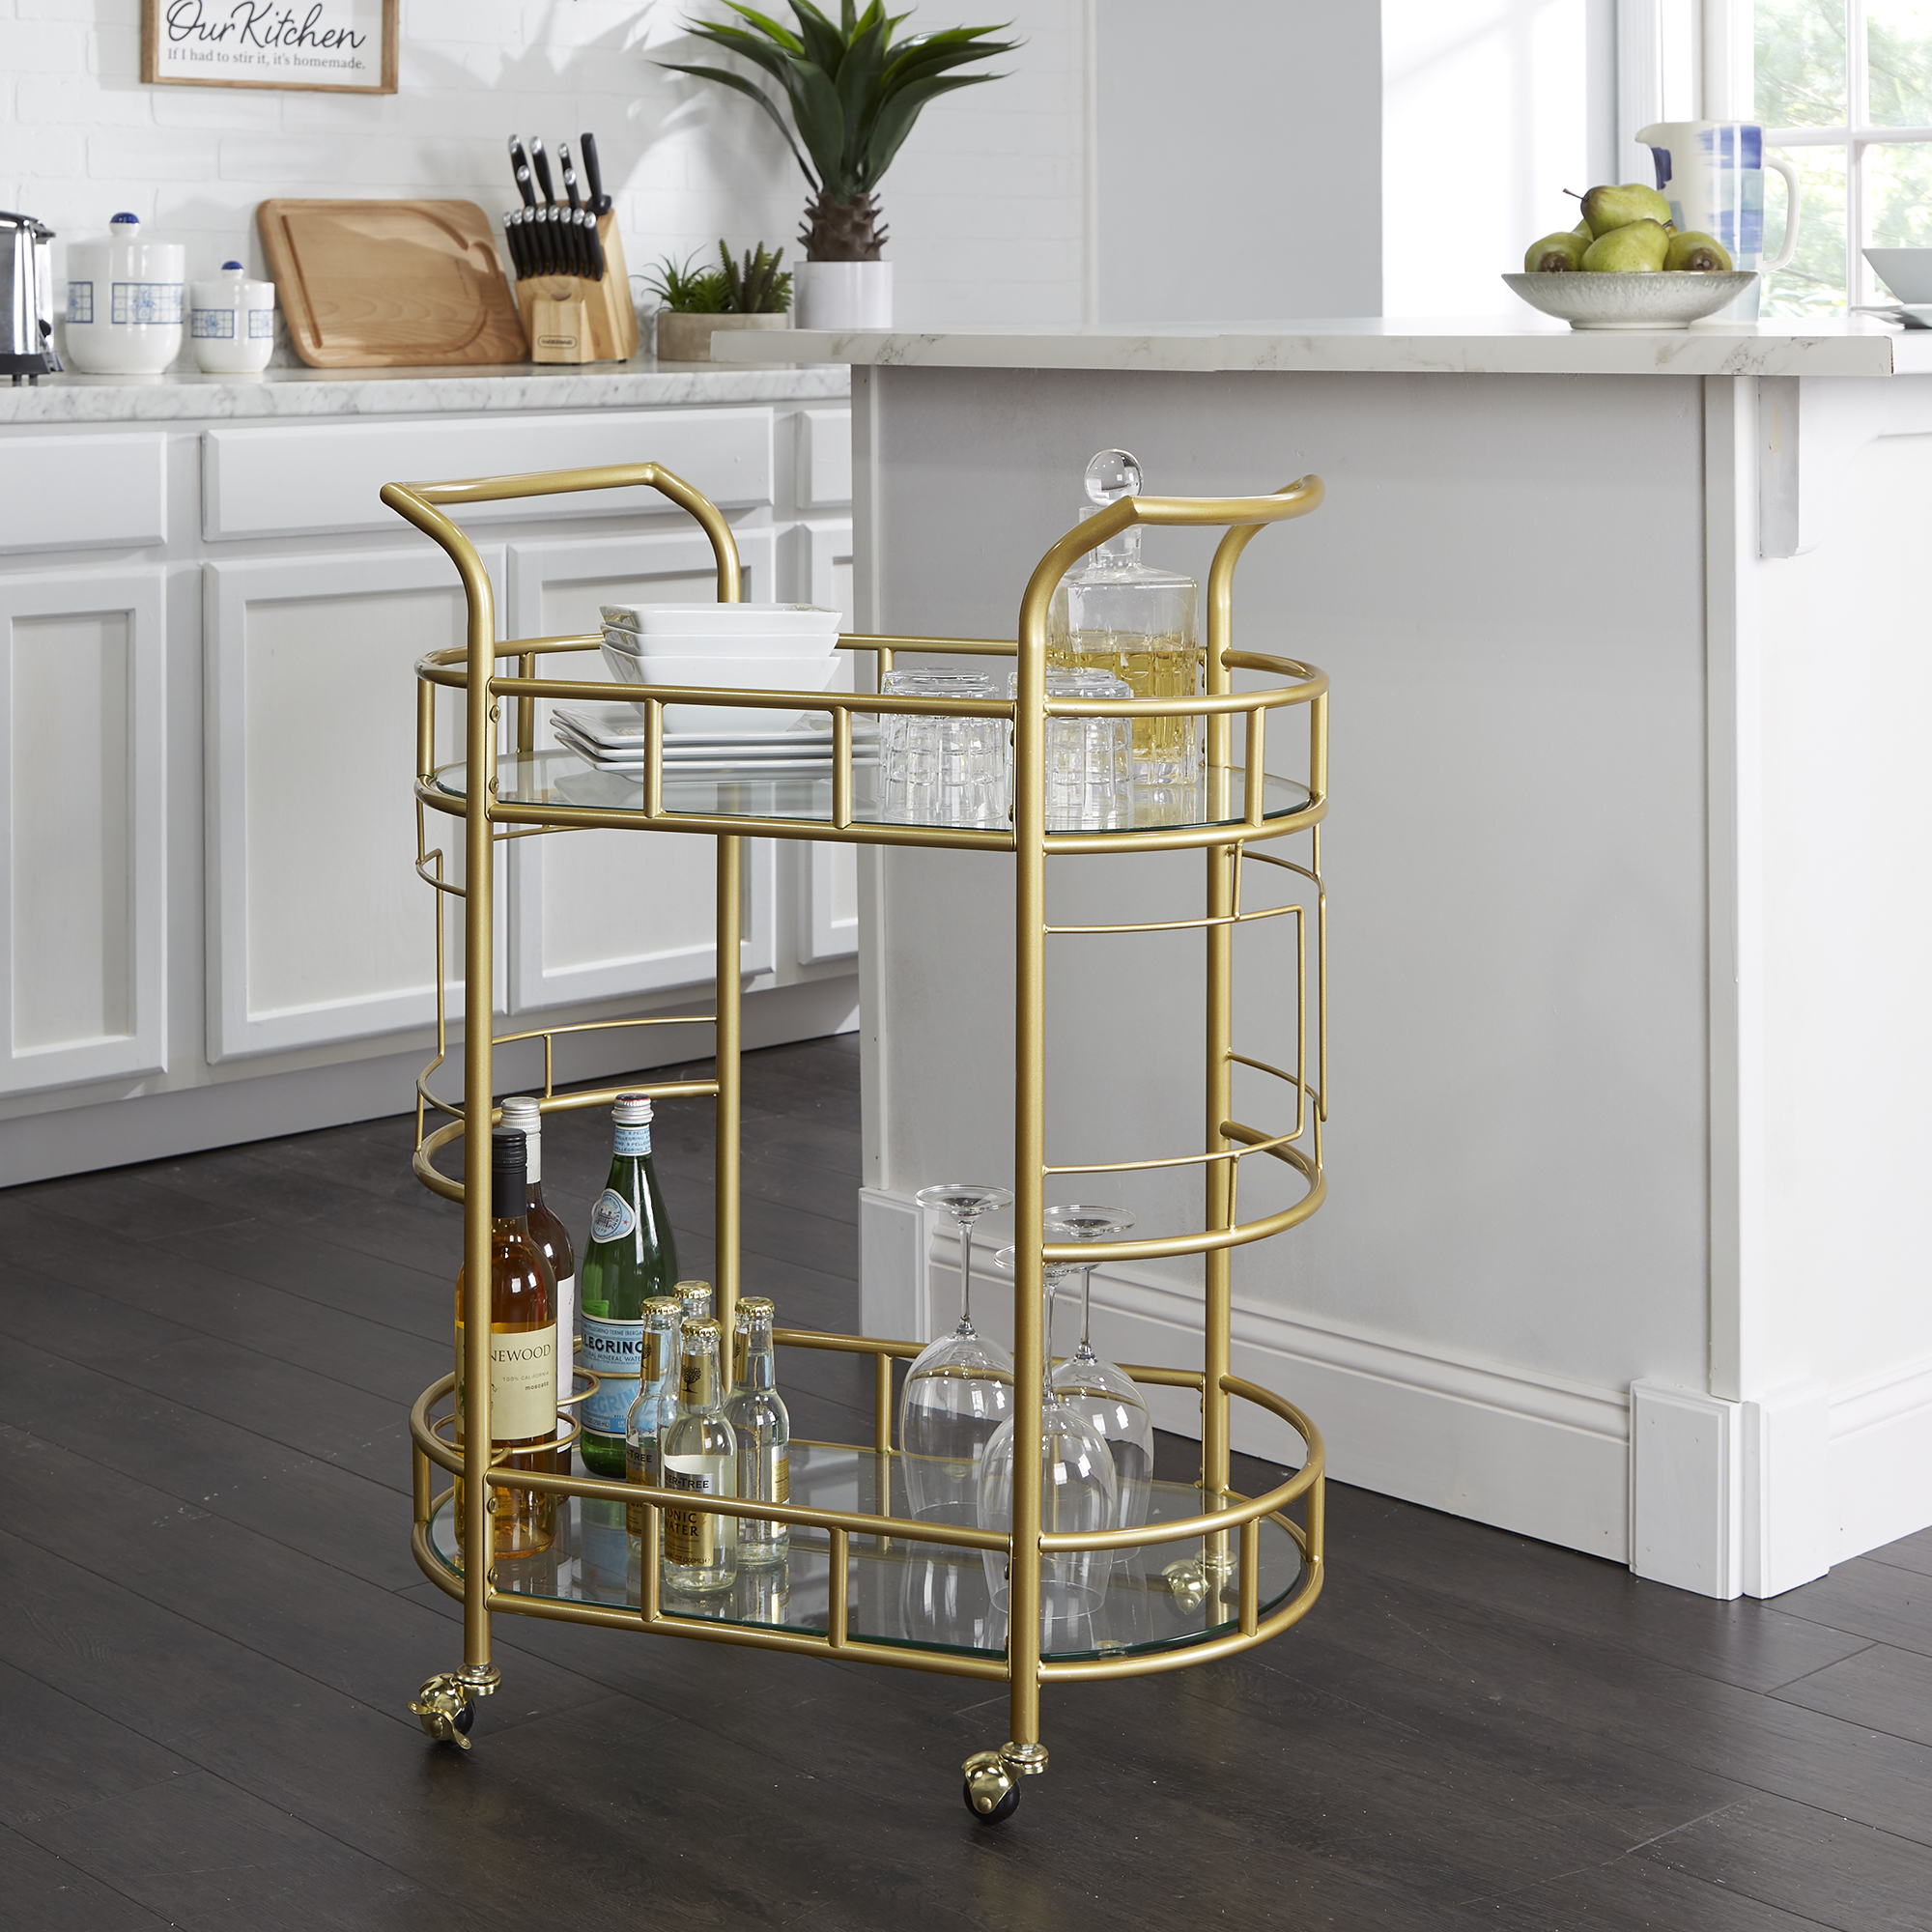 Better Homes & Gardens Fitzgerald Bar Cart with Matte Gold Metal Finish, 2-Tiers - image 1 of 10